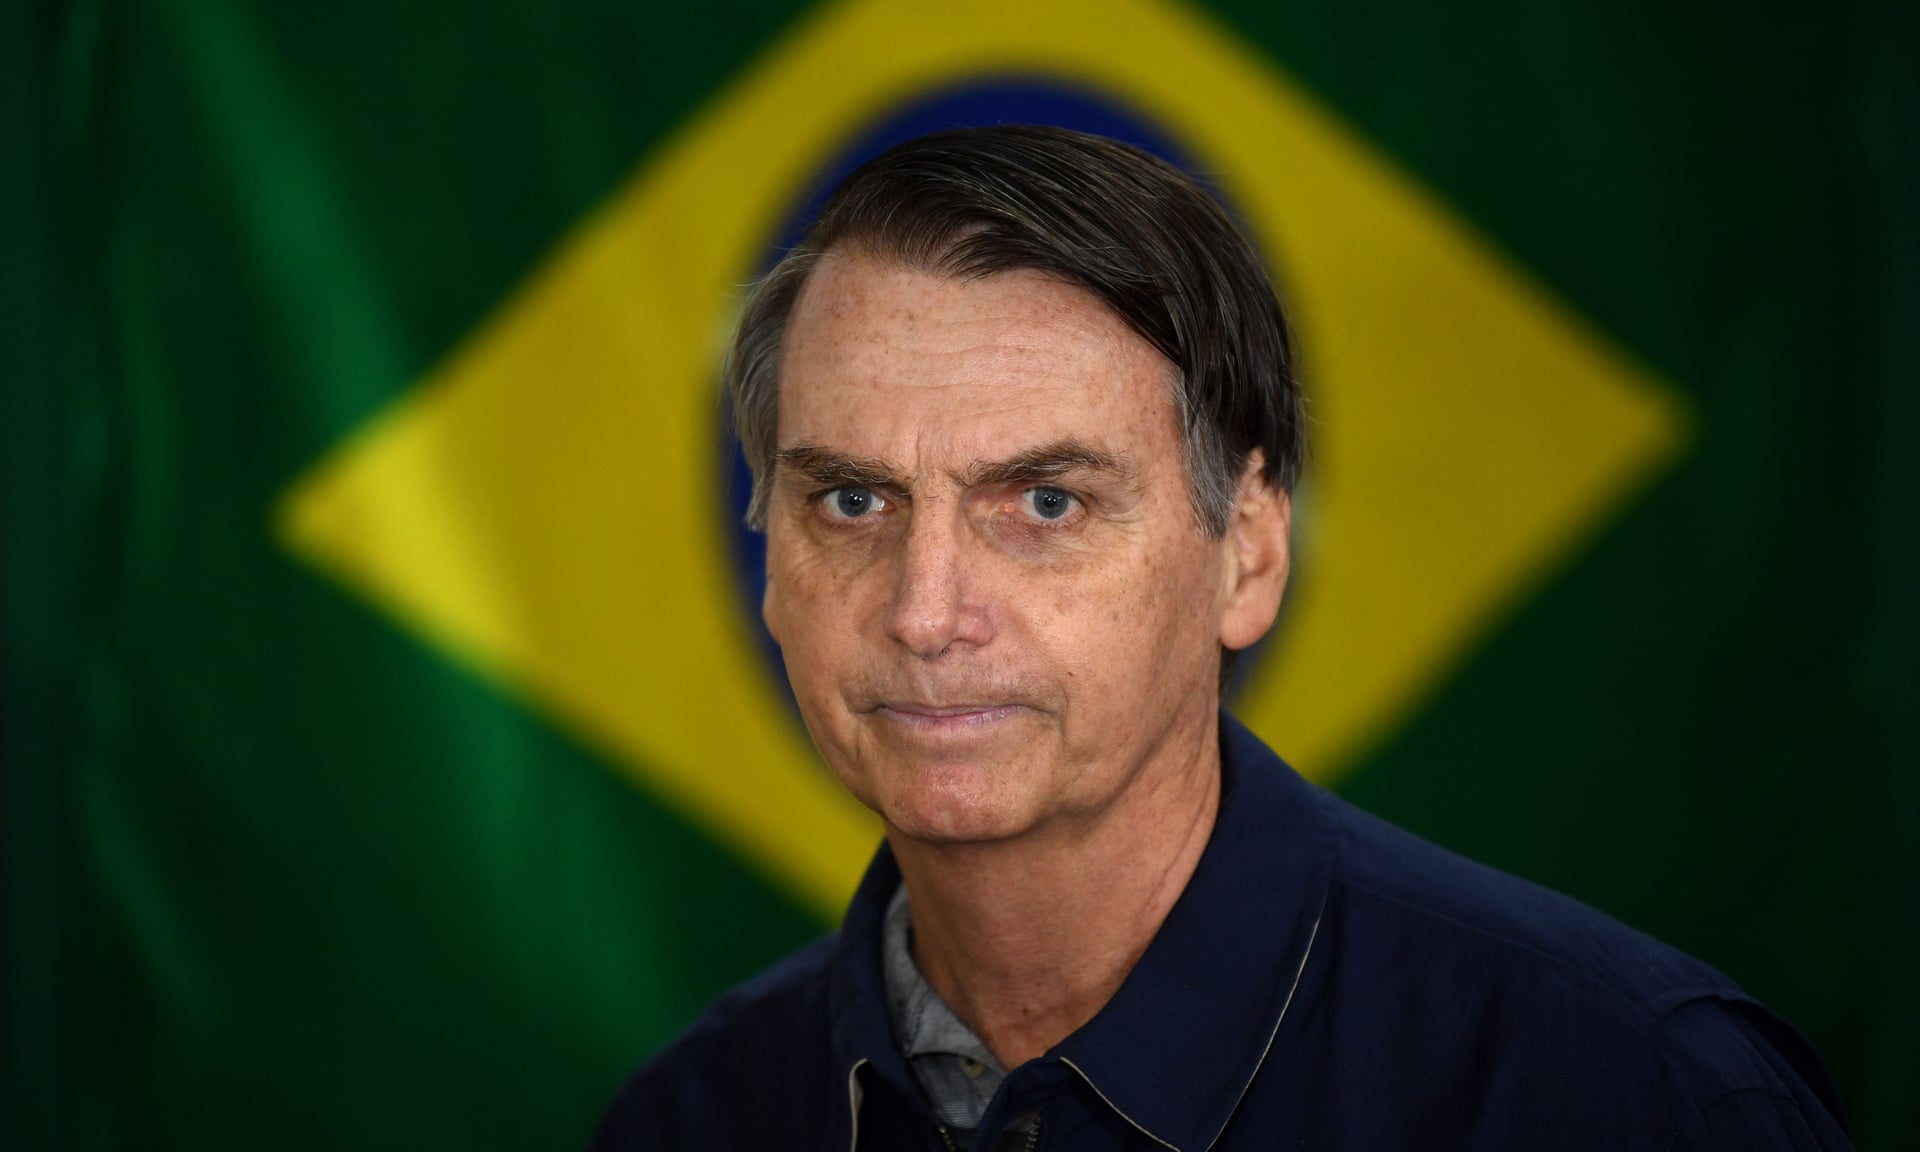 President Jair Bolsonaro is framed by the national flag of Brazil. Recently, his “popularity is falling because people feel baffled by the things he is doing and saying”, according to one conservative columnist. Photo: Mauro Pimentel / AFP / Getty Images